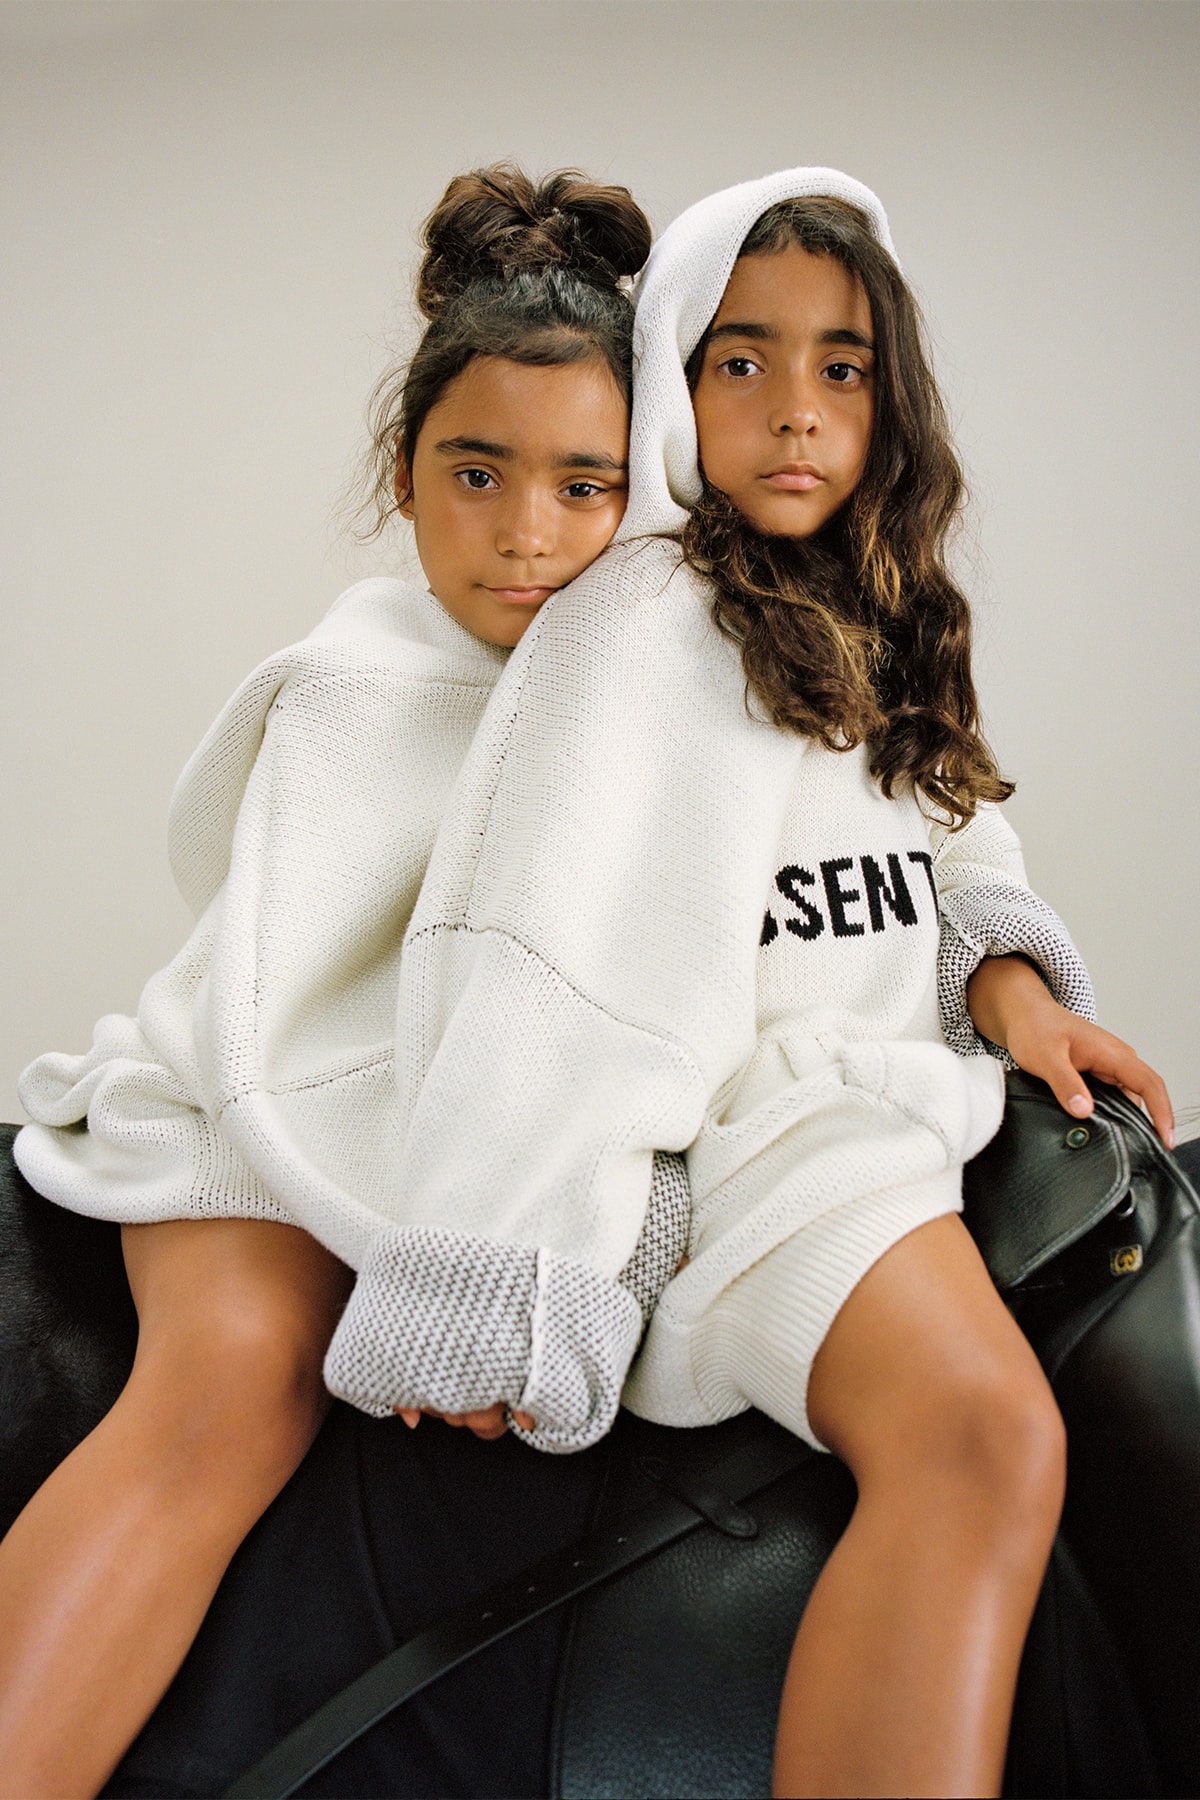 Fear of God Essential Kids Collection